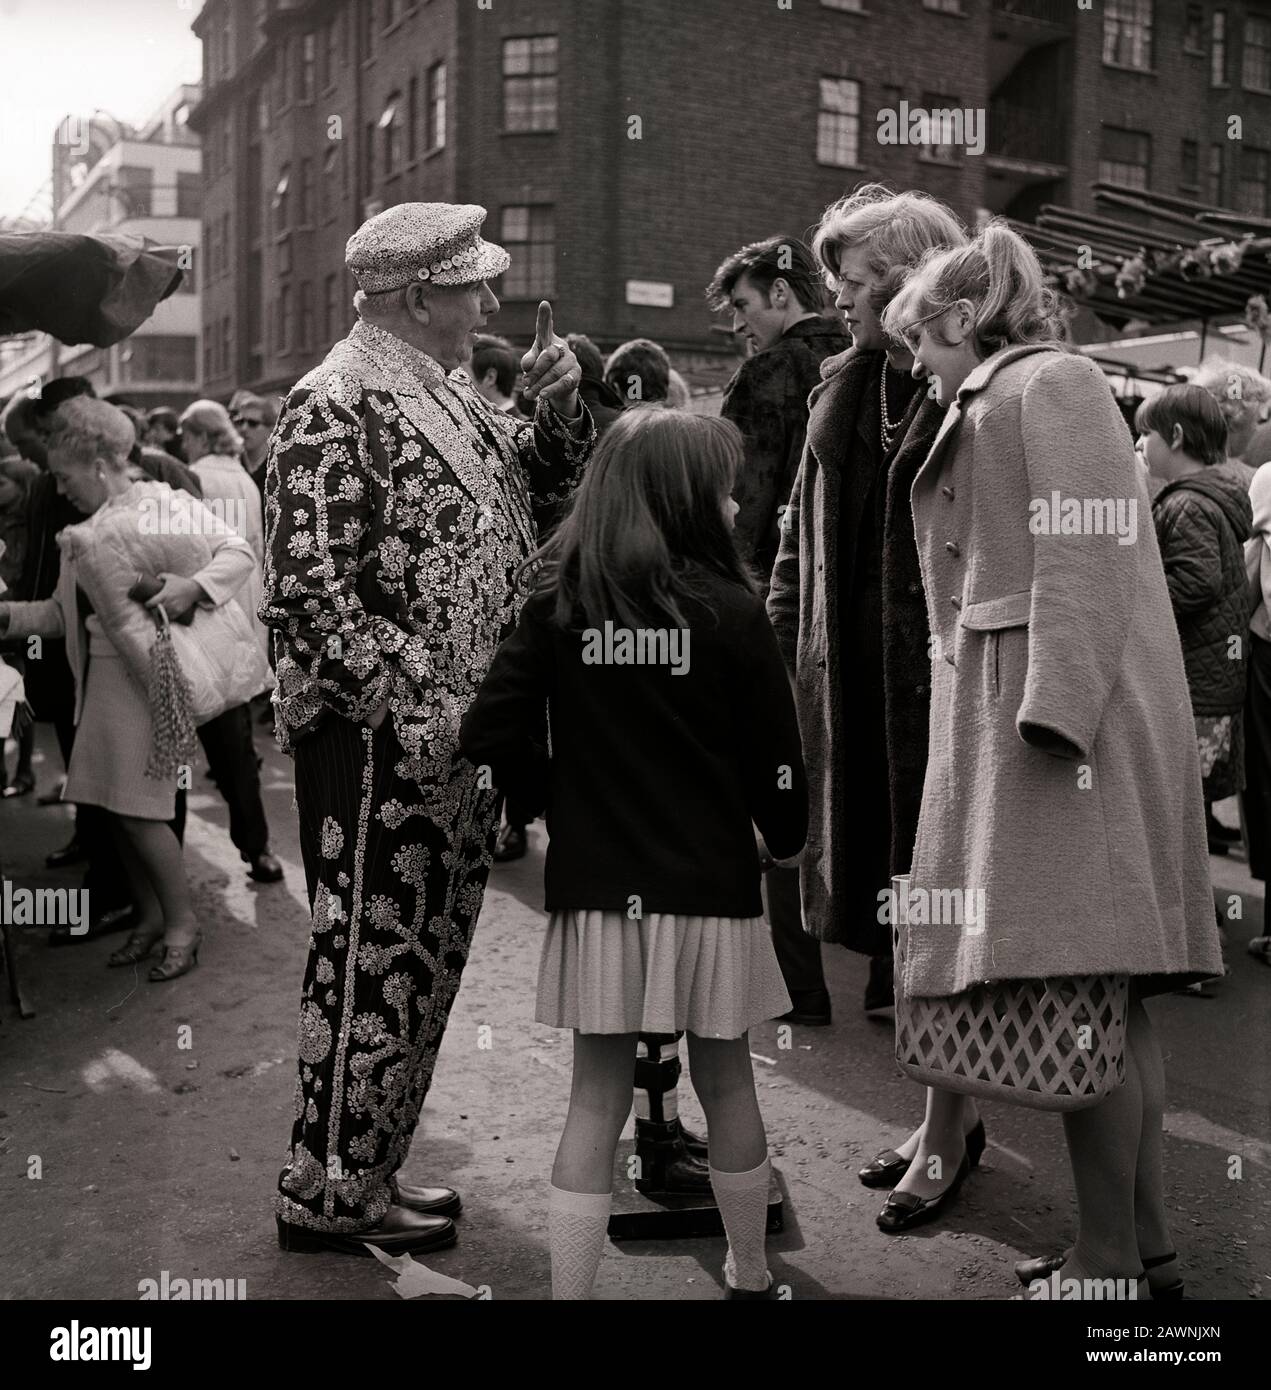 A Pearly King collecting money for Spastic children at the Petticoat Lane Market in East London Stock Photo